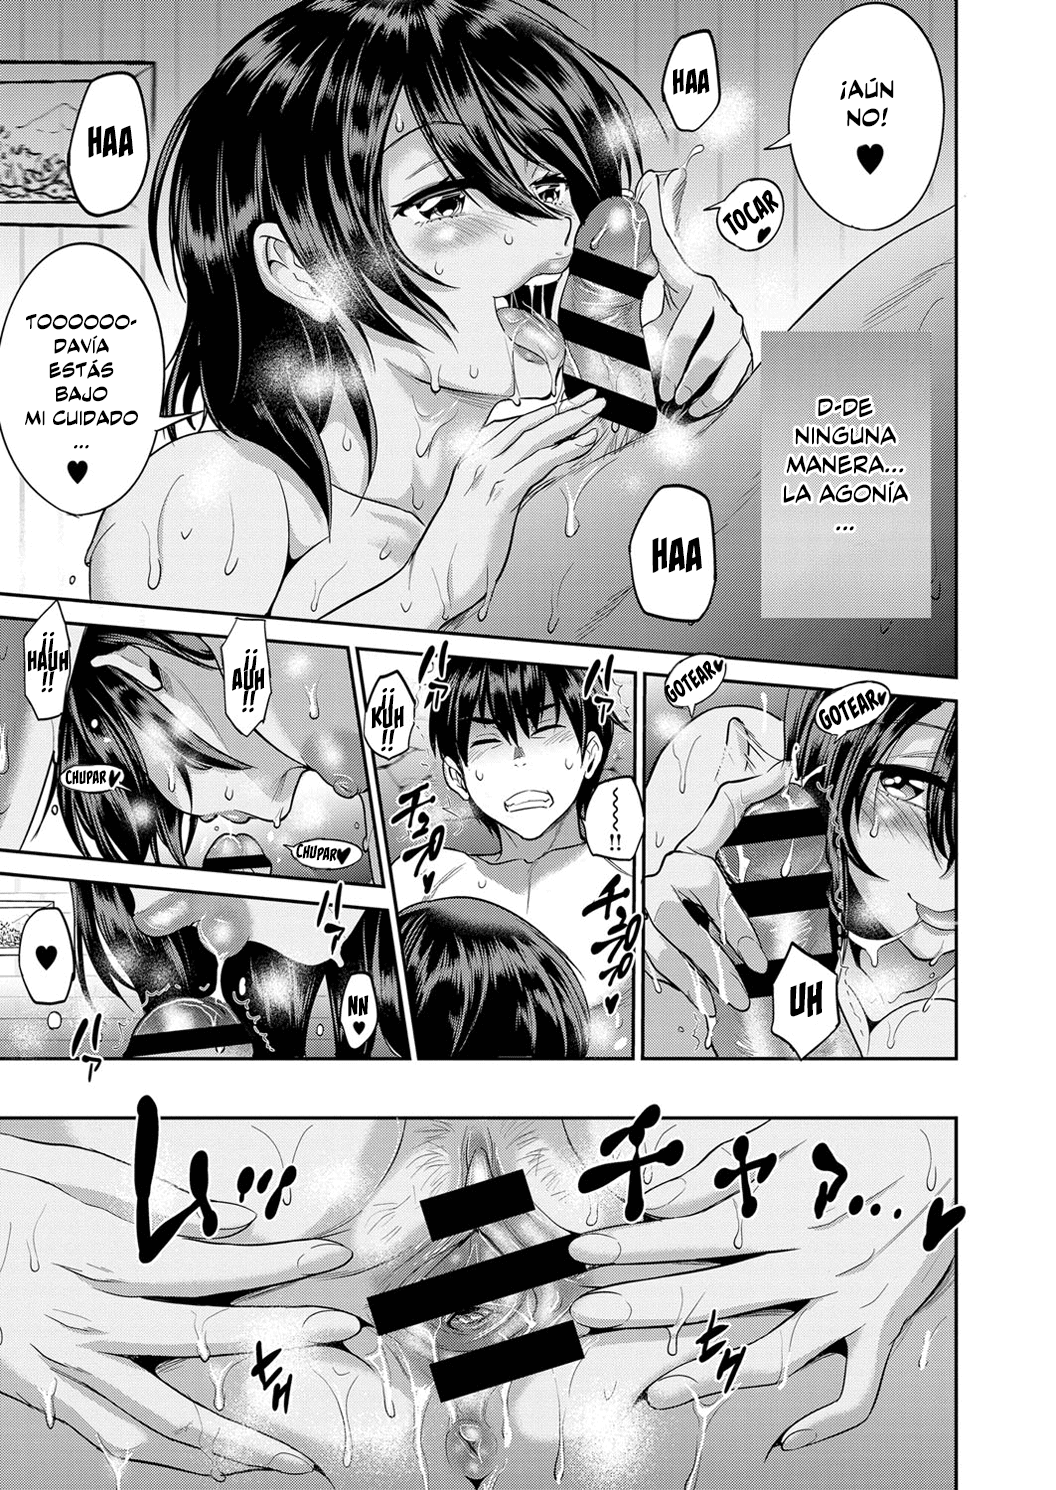 [DISTANCE] Joshi Lacu! - Girls Lacrosse Club ~2 Years Later~ Cap.08.5 (COMIC ExE 13) [Español] [NicoNiiScans] [Digital] [DISTANCE] じょしラク! ～2 Years Later～ 第8.5話 (コミック エグゼ 13) [スペイン翻訳] [DL版]